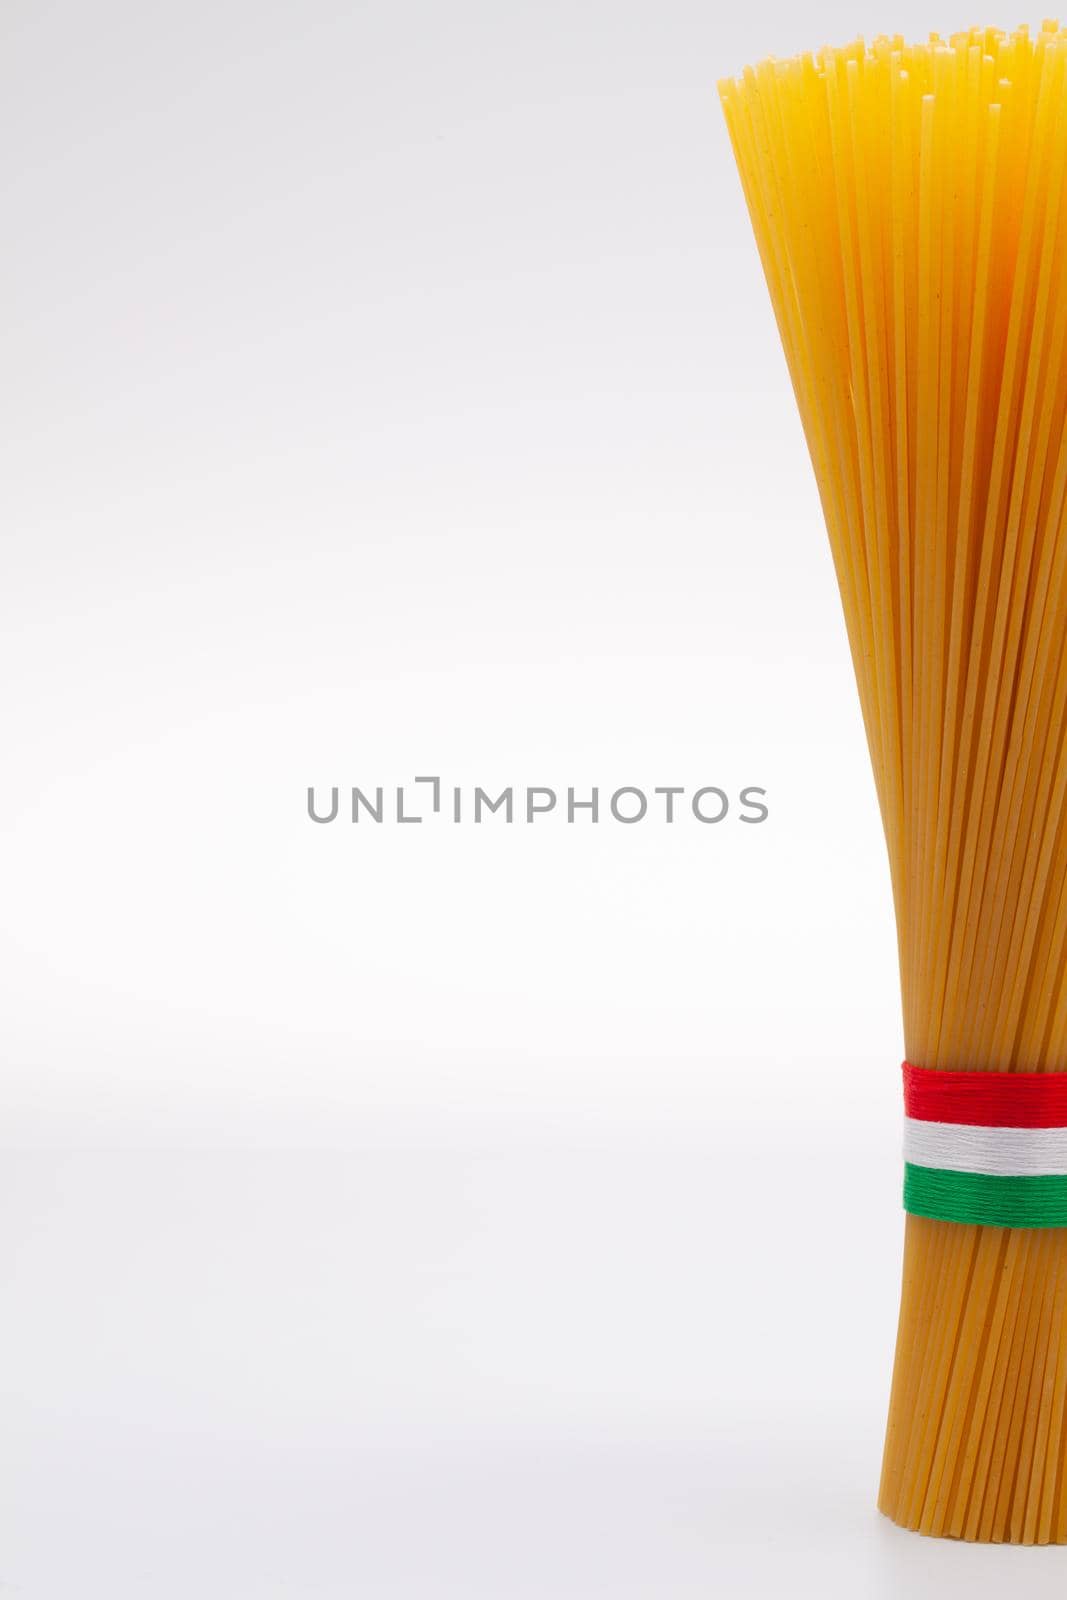 Bundle of spaghetti and Italian flag on the white table by CaptureLight